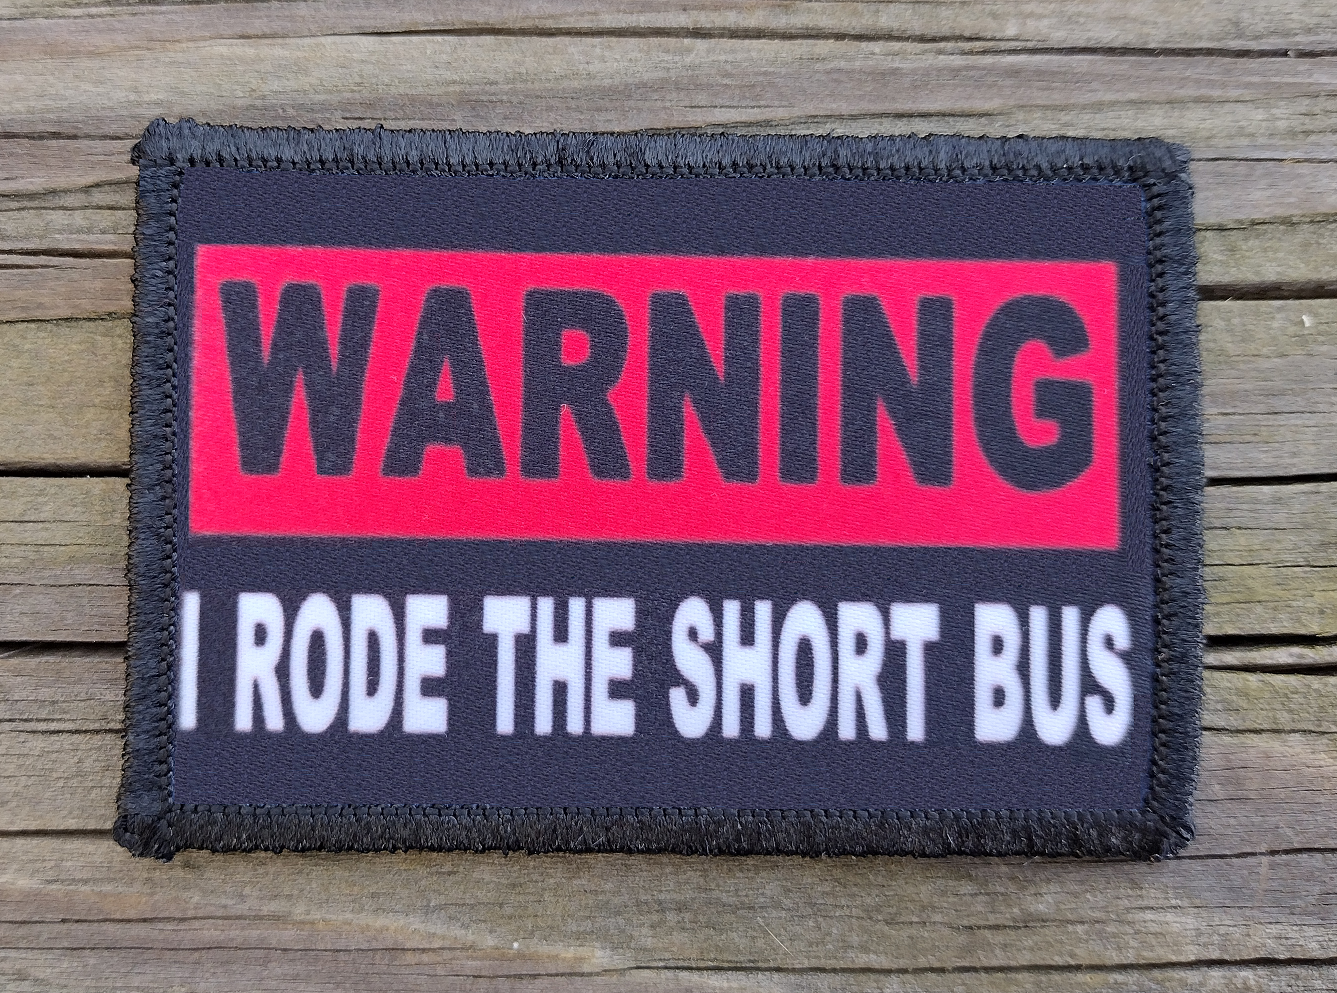 Warning I Rode The Short Bus Morale Patch